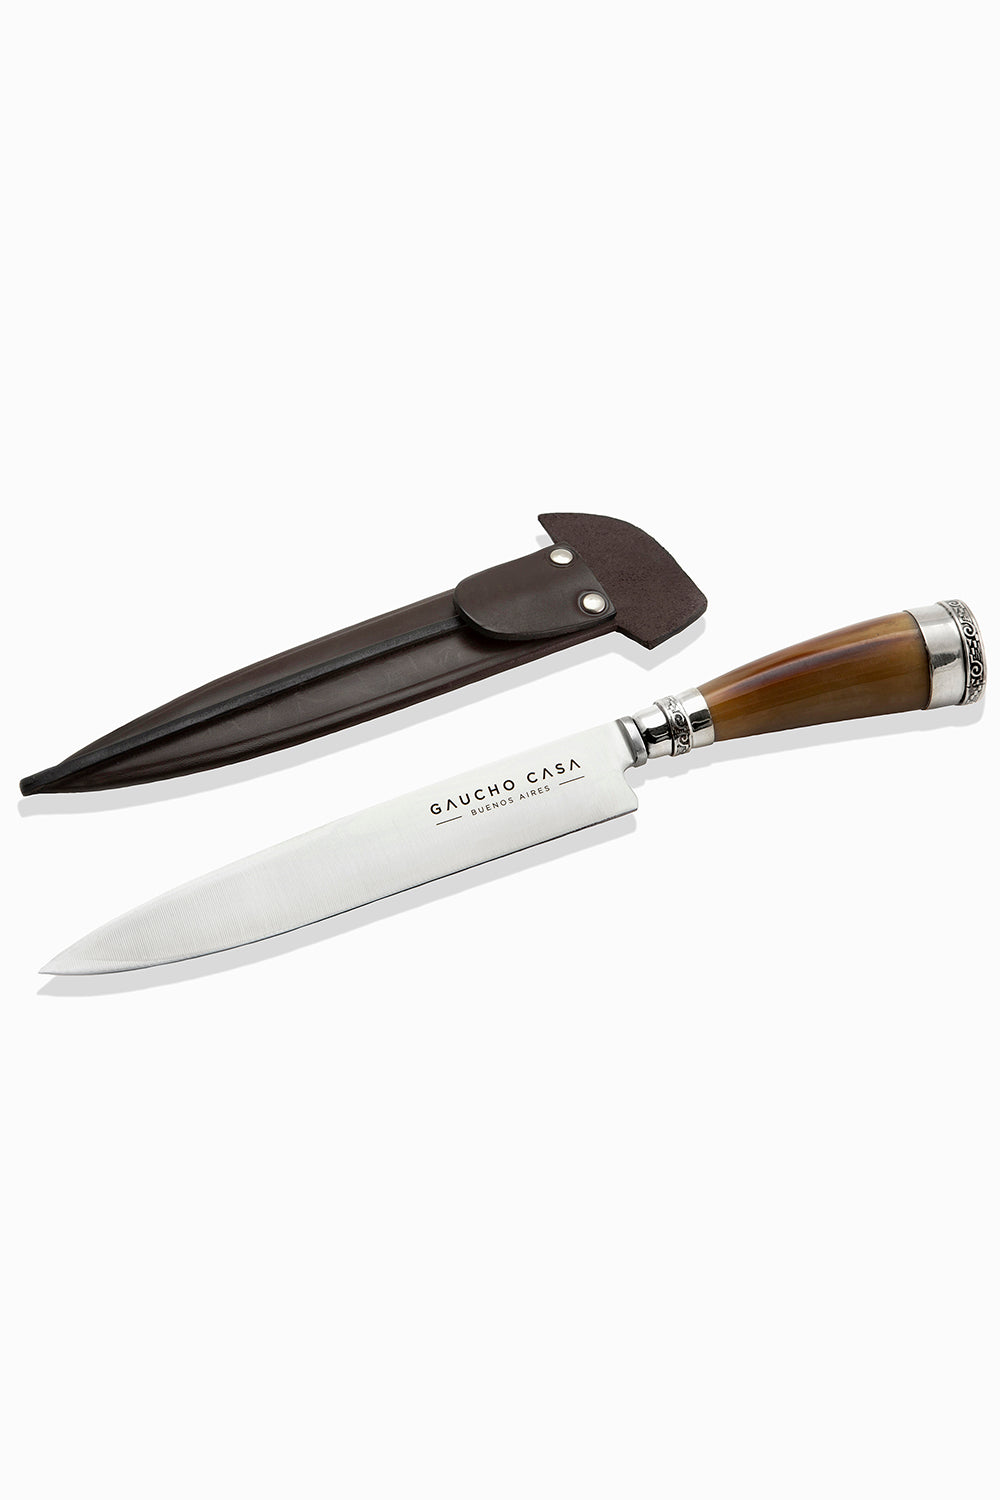 Gaucho Casa Tandil Gaucho Knife With Cow Horn and Nickel-Silver Handle and Stainless-Steel Blade